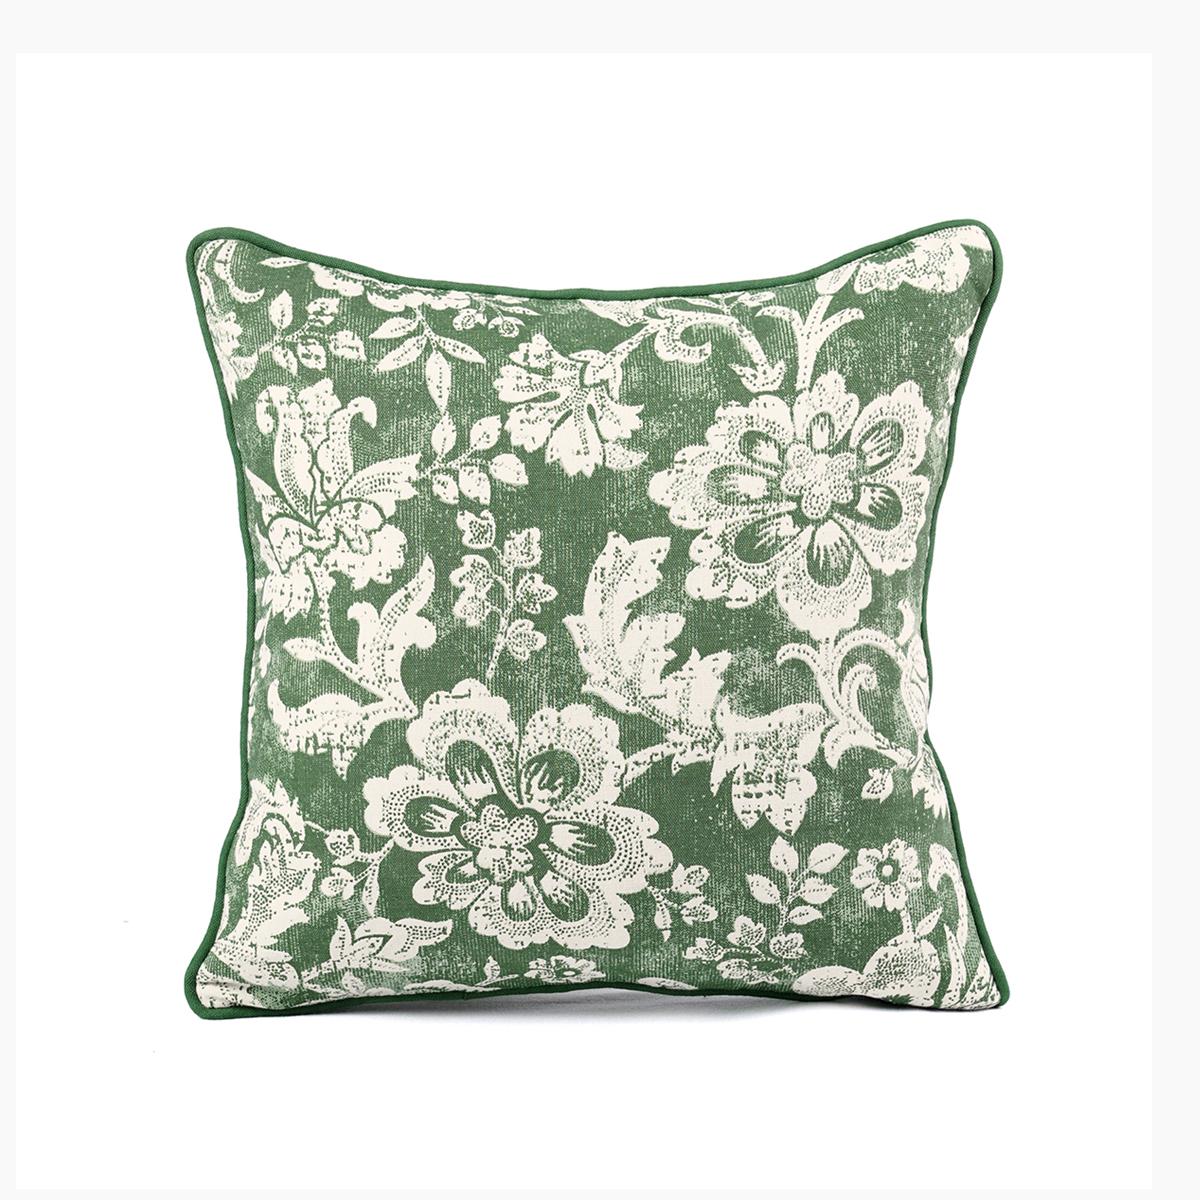 Green DOMINOTERIE bold floral print cotton pillow cover, sizes available